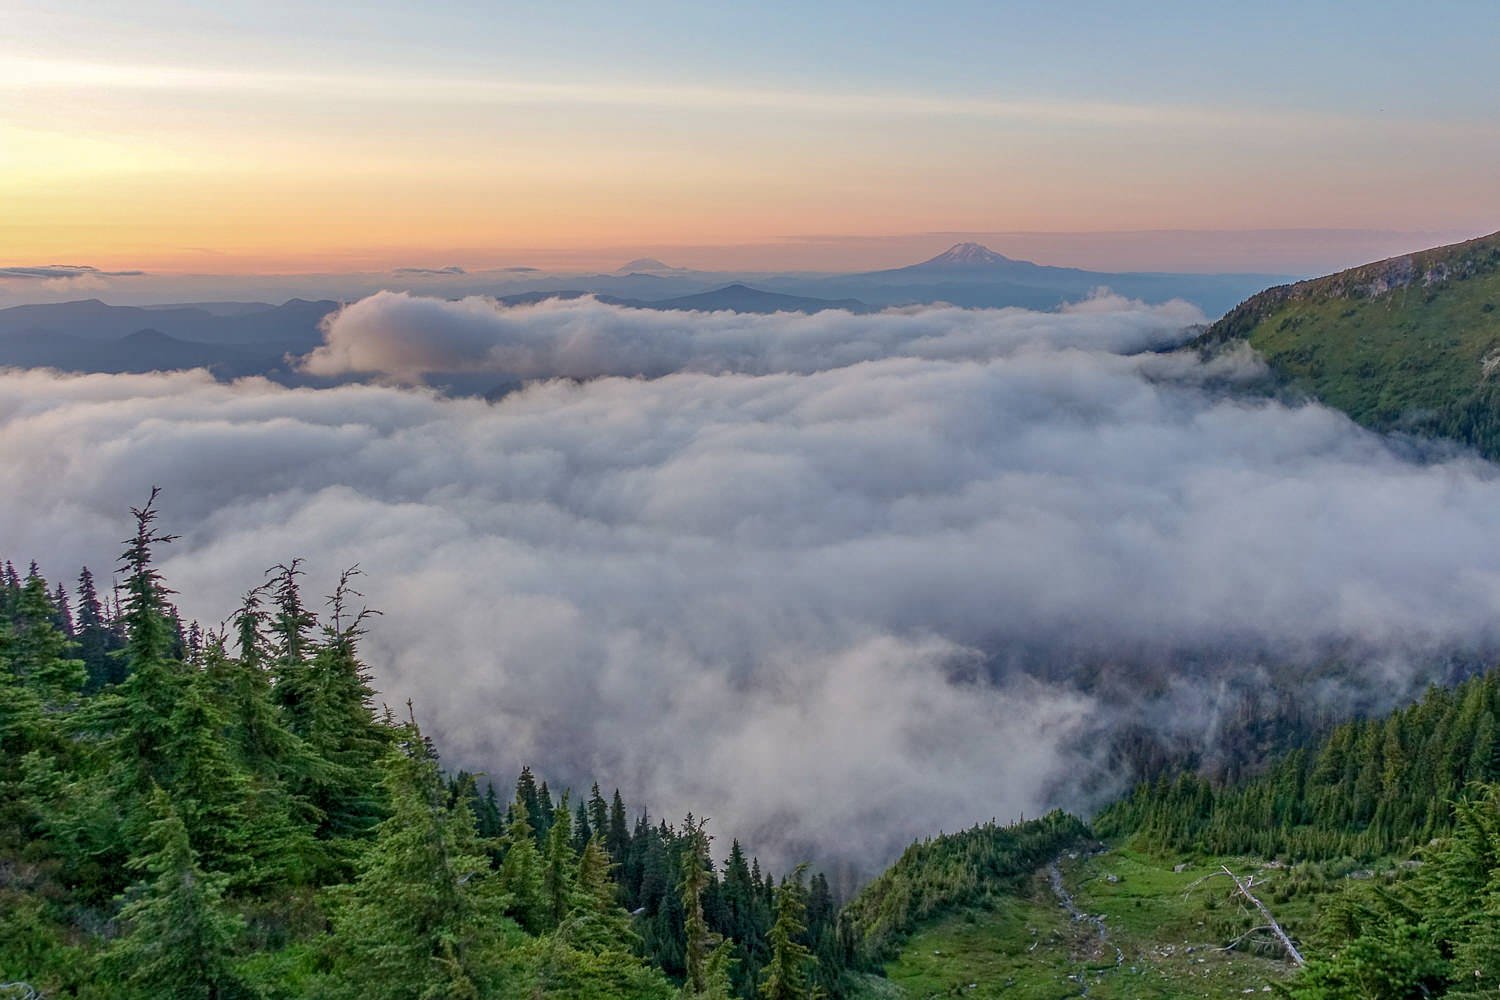 Looking down over a bank of clouds from the Timberline Trail.